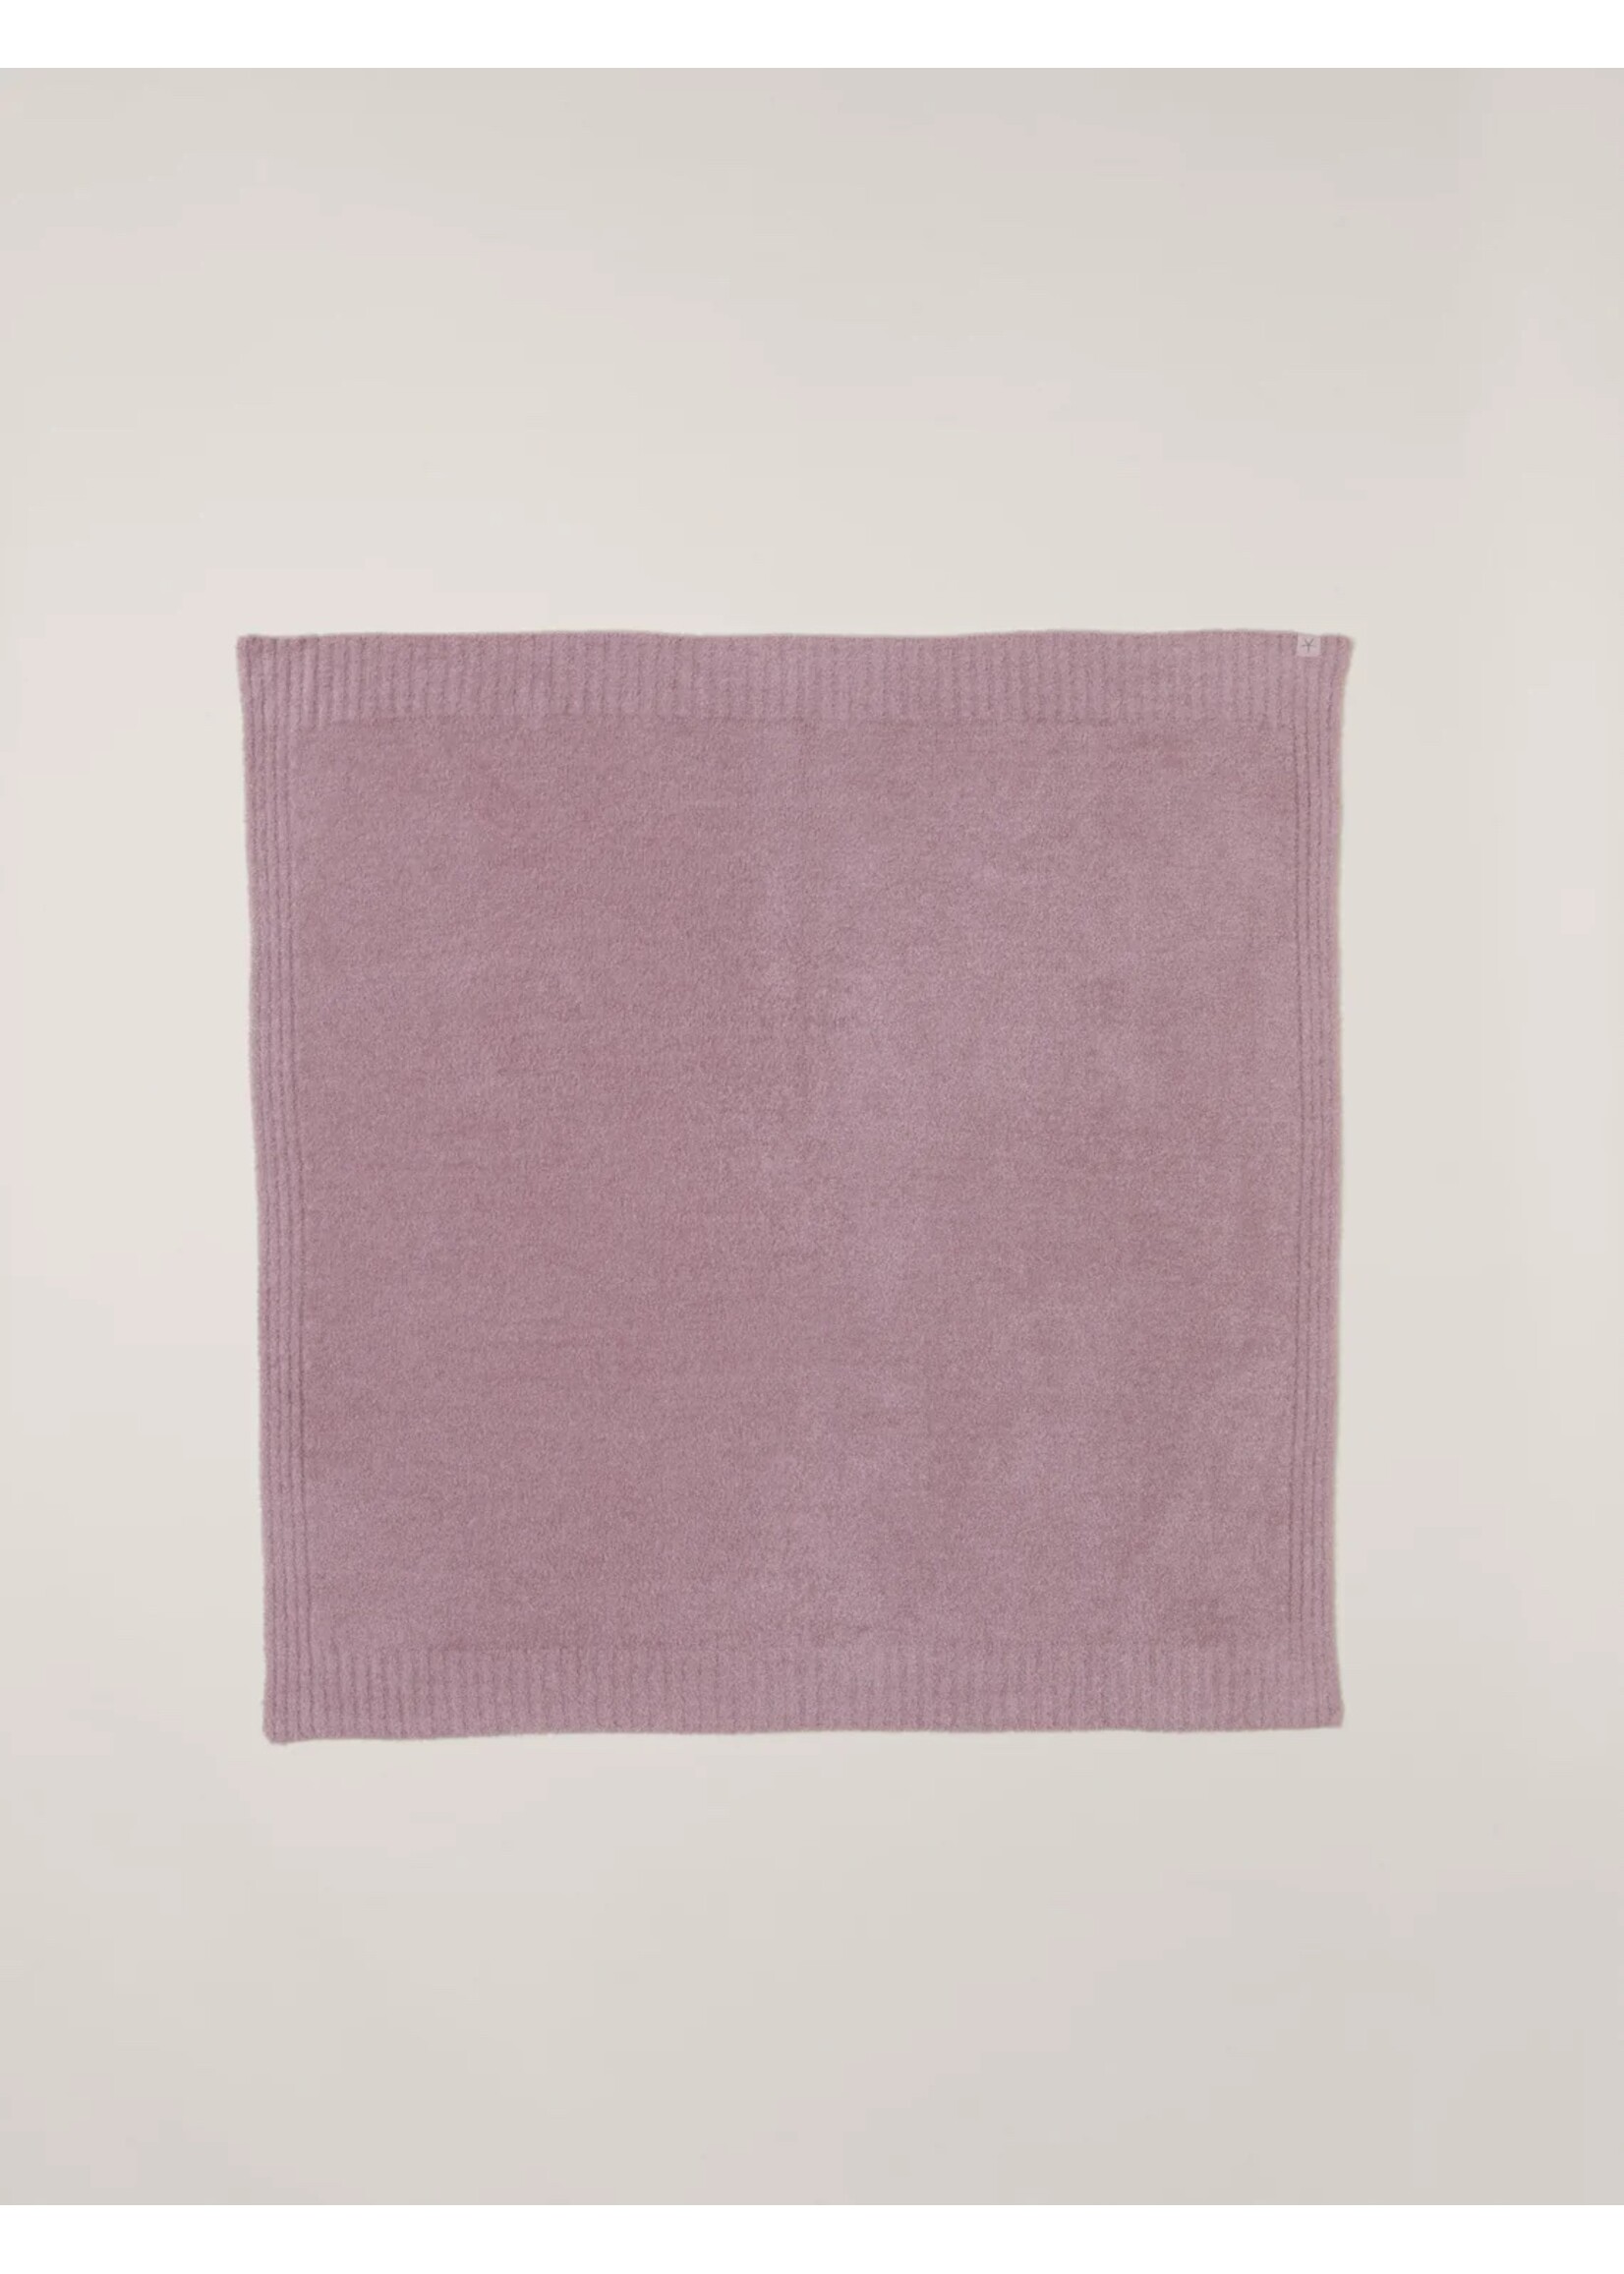 Barefoot Dreams Cozychic Lite Baby Receiving Blanket - Teaberry